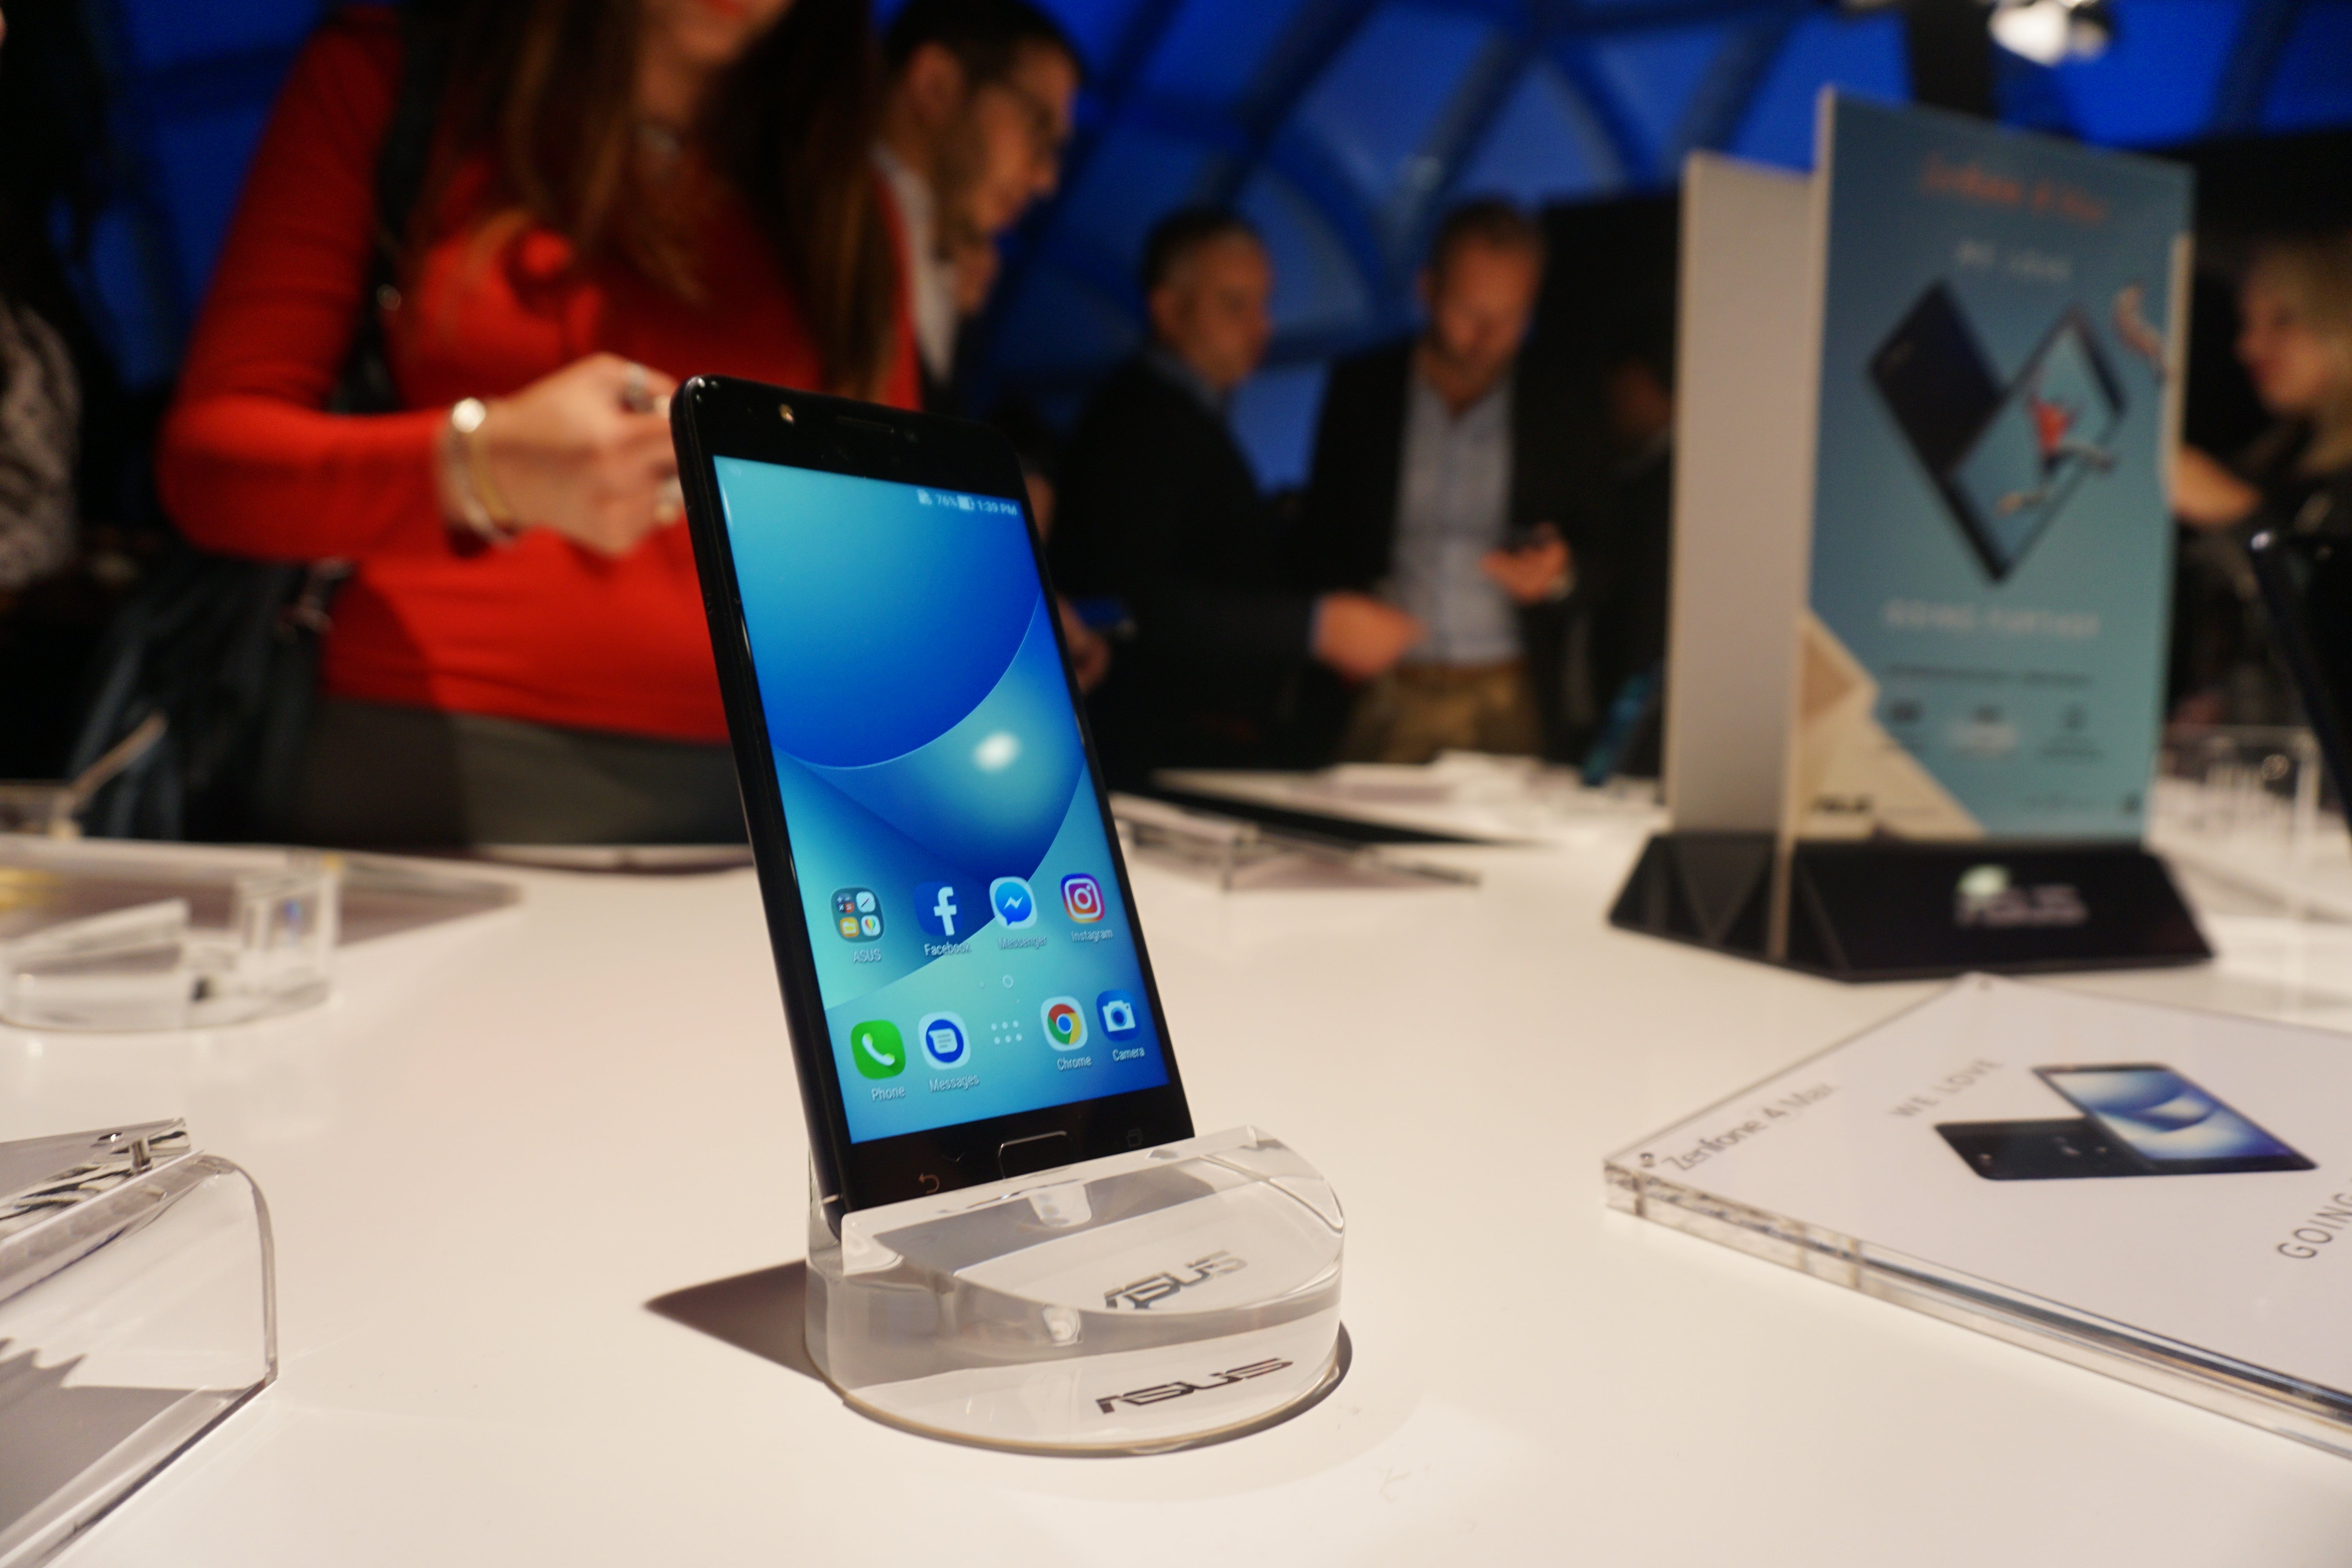 Asus Zenfone 4 Max displayed at an event with promotional materials.